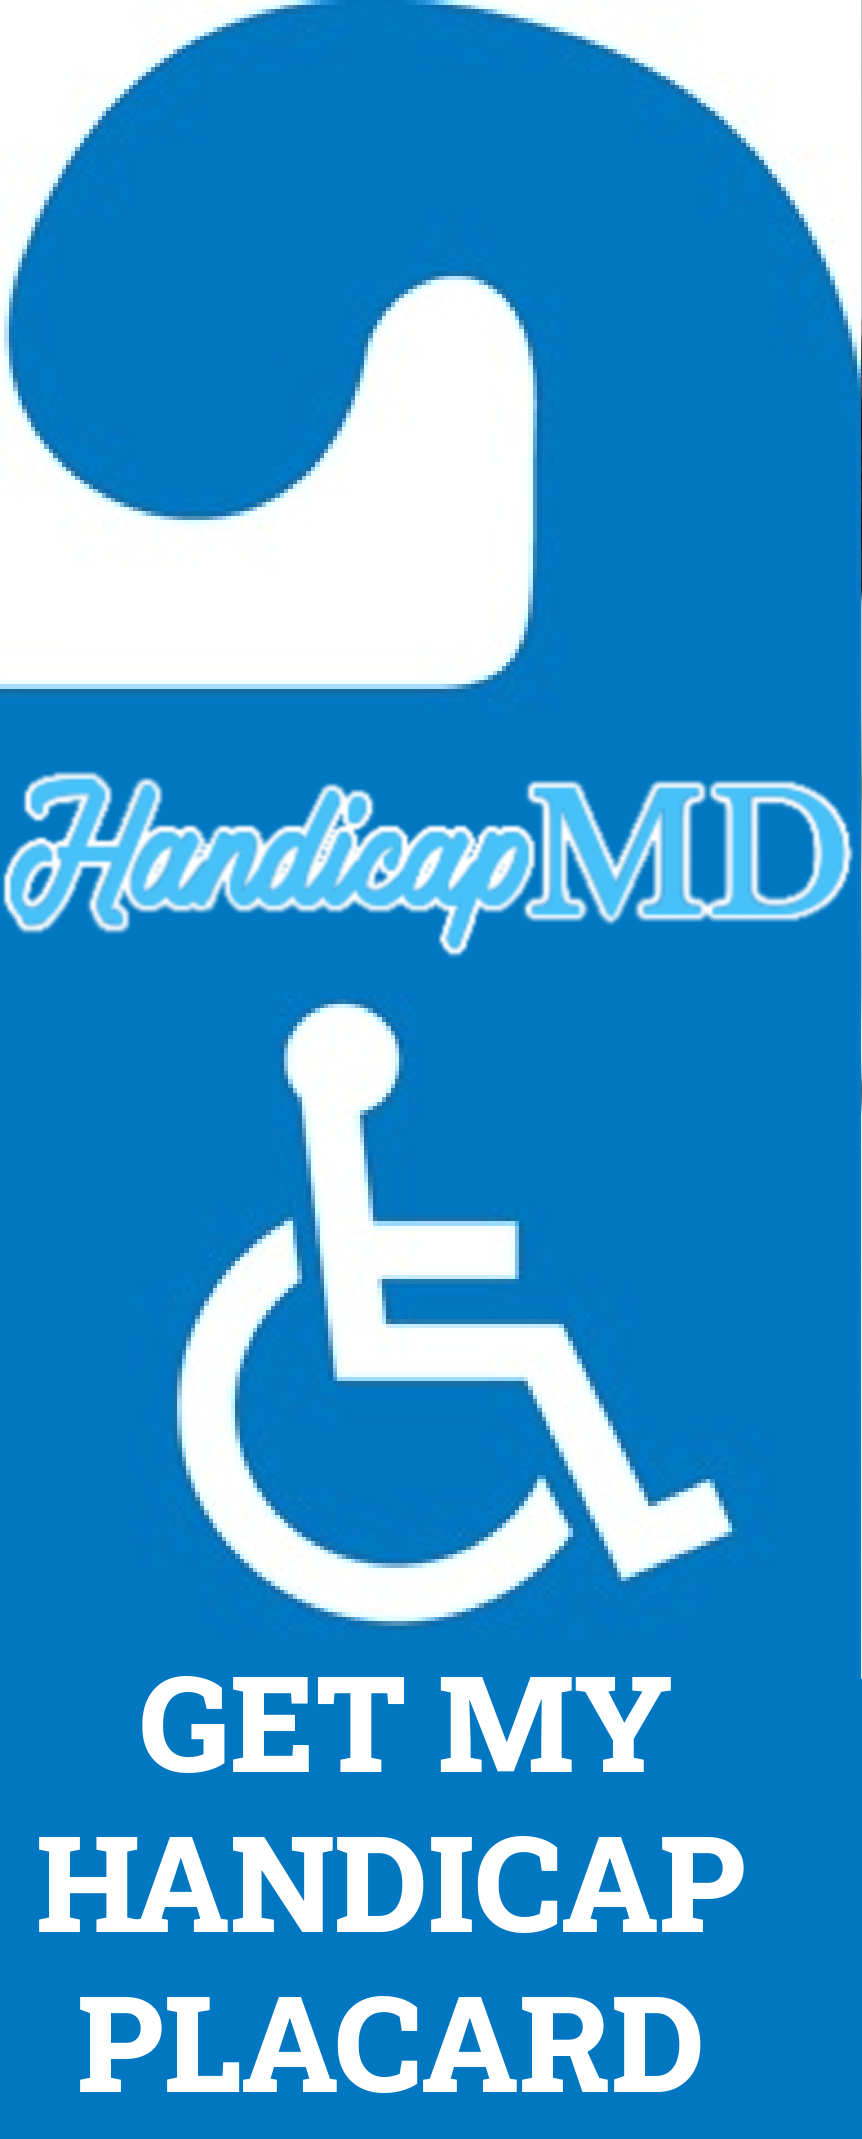 Disabled Parking Permits for Organizations